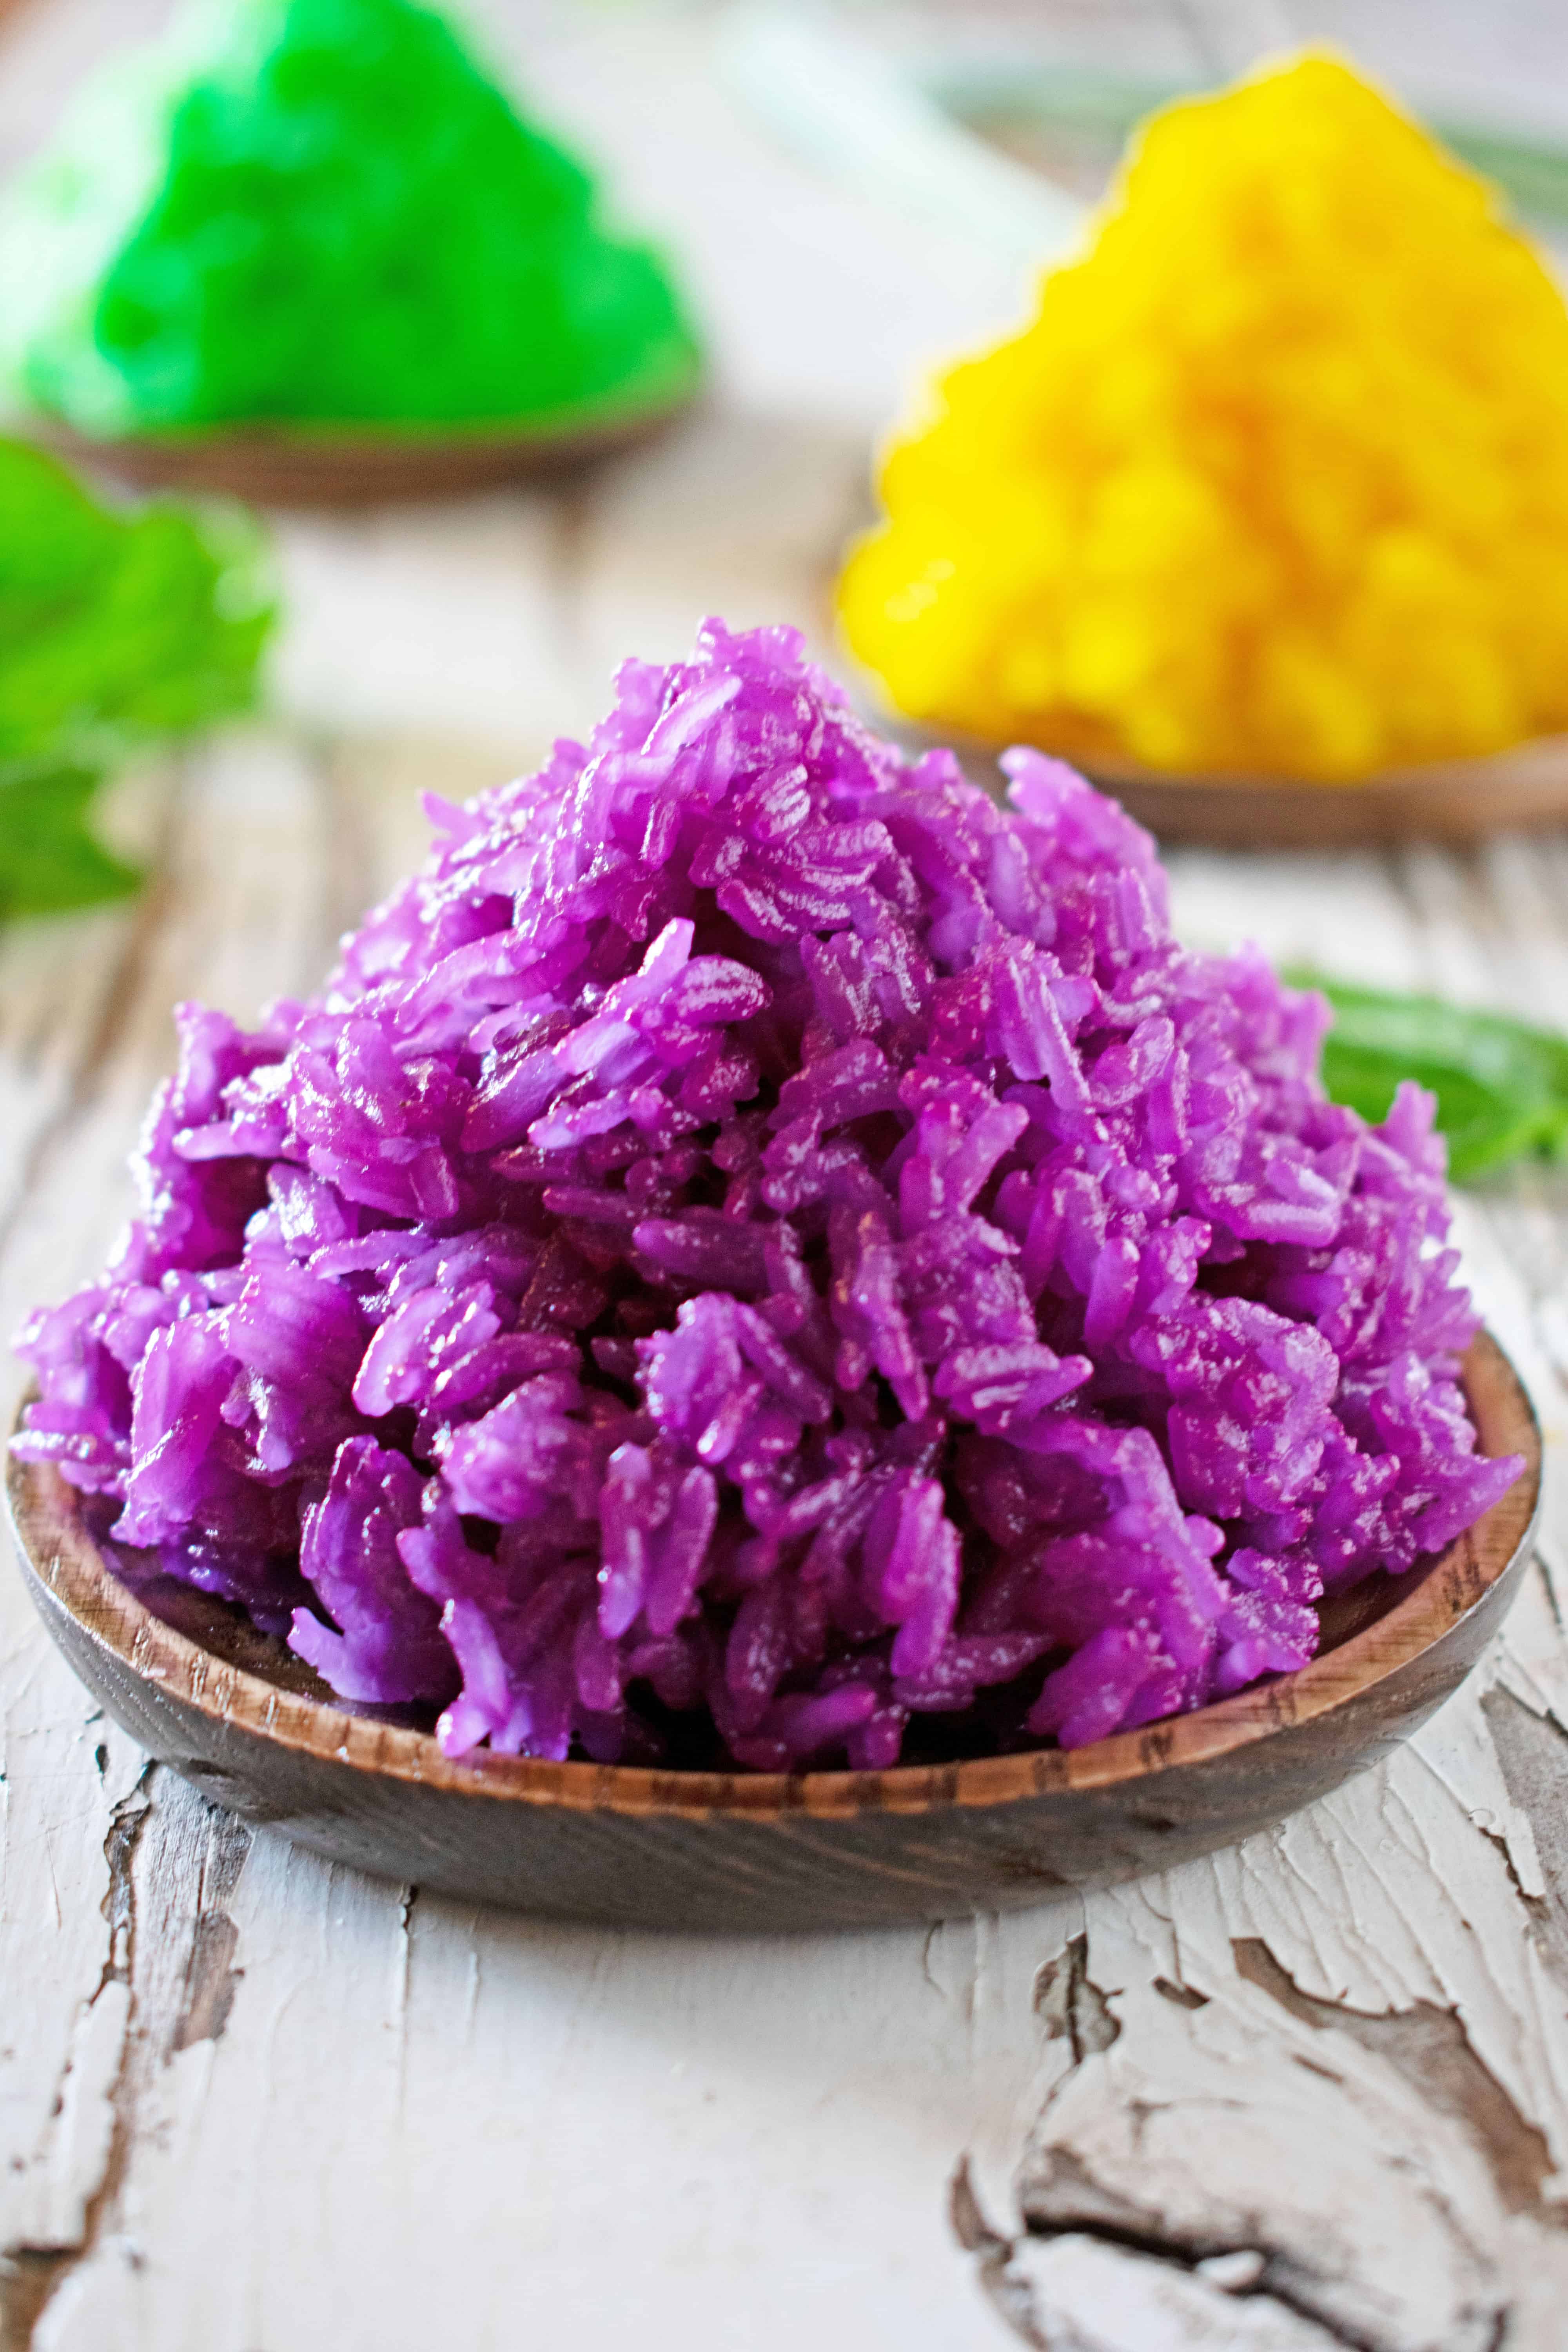 How to Make Vietnamese Sweet Coconut Purple Sticky Rice Using a